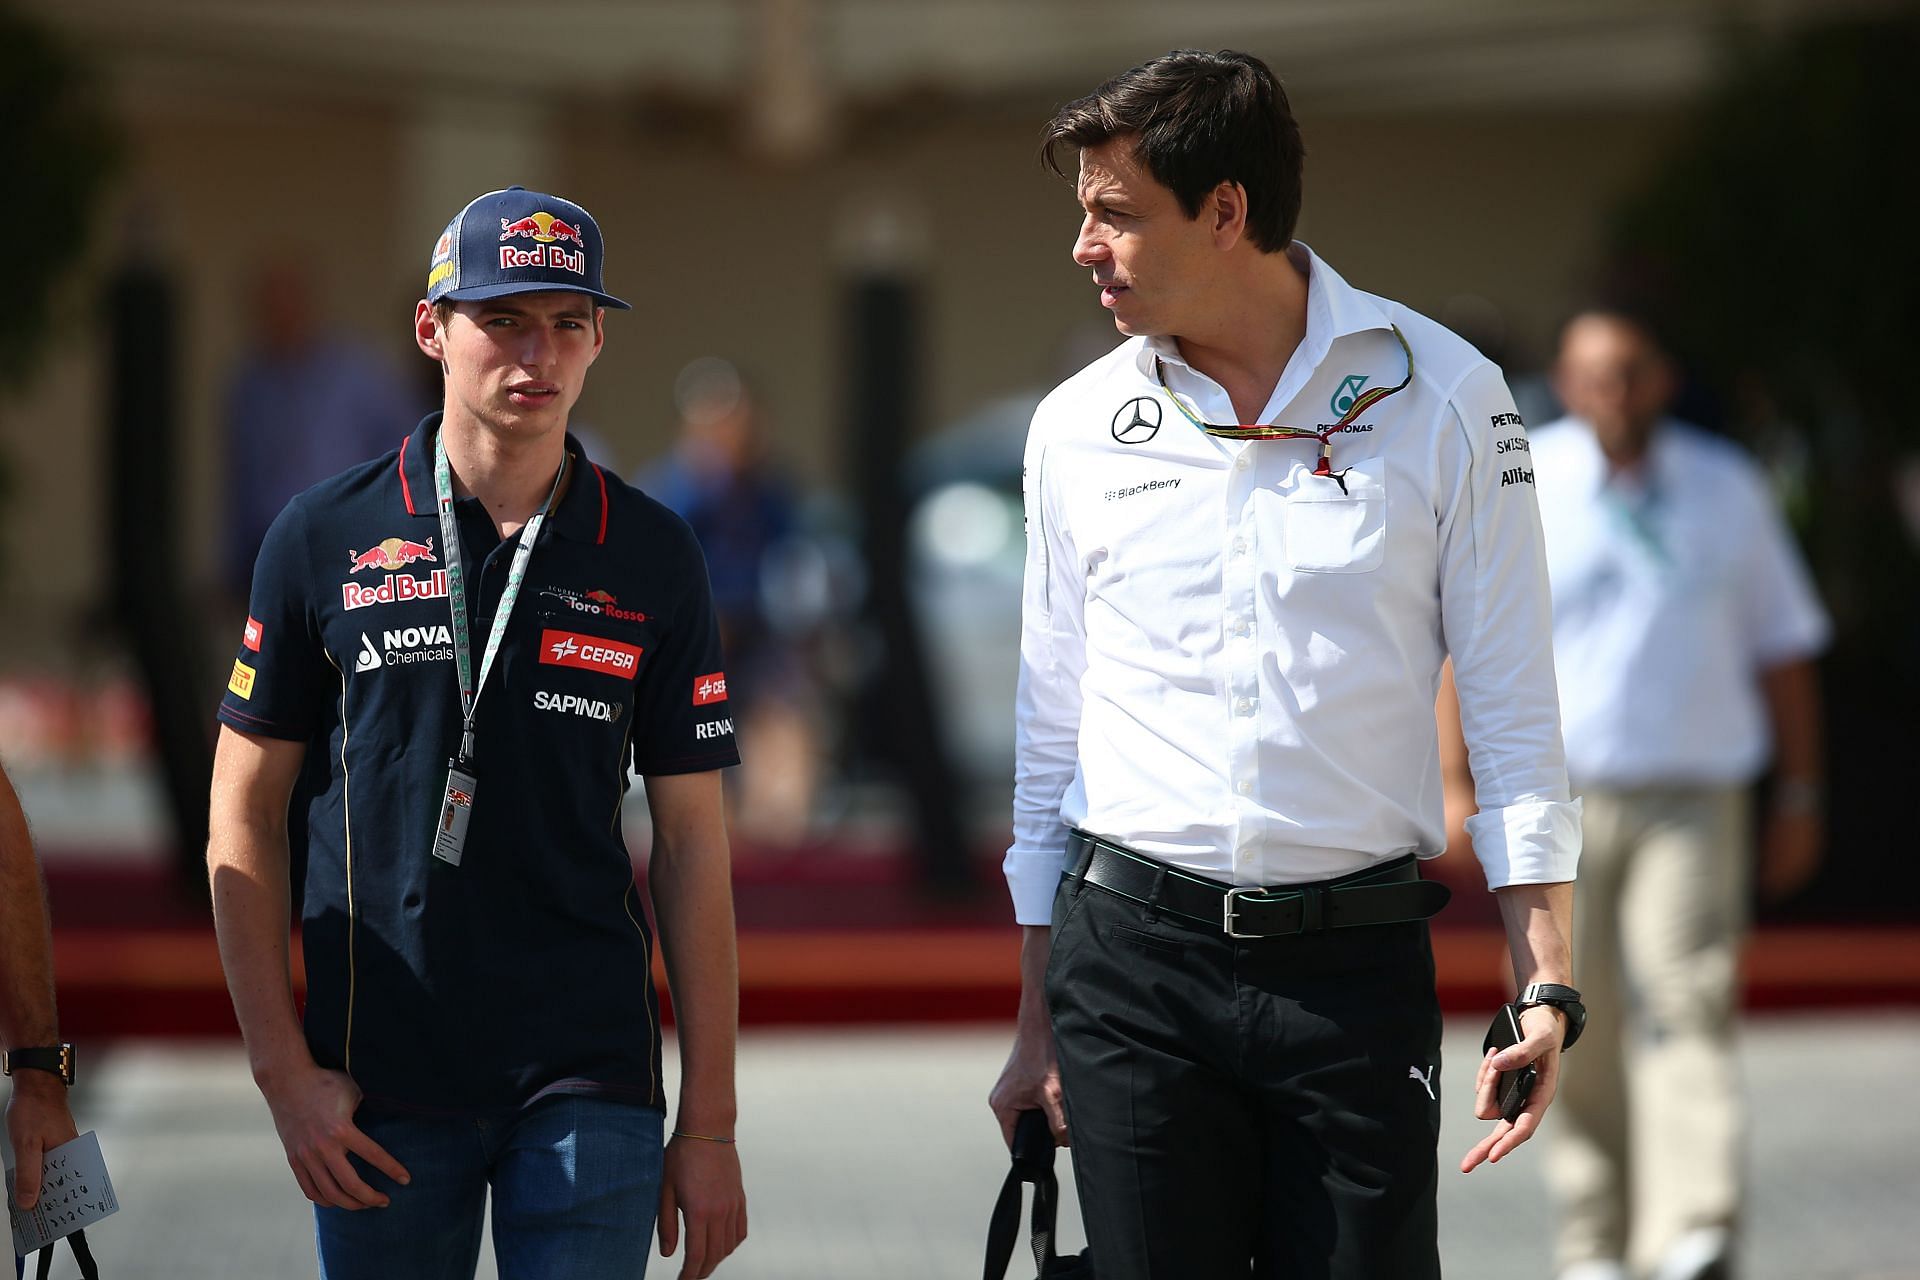 F1 Grand Prix of Abu Dhabi - Max Verstappen talks to Toto Wolff in 2014.